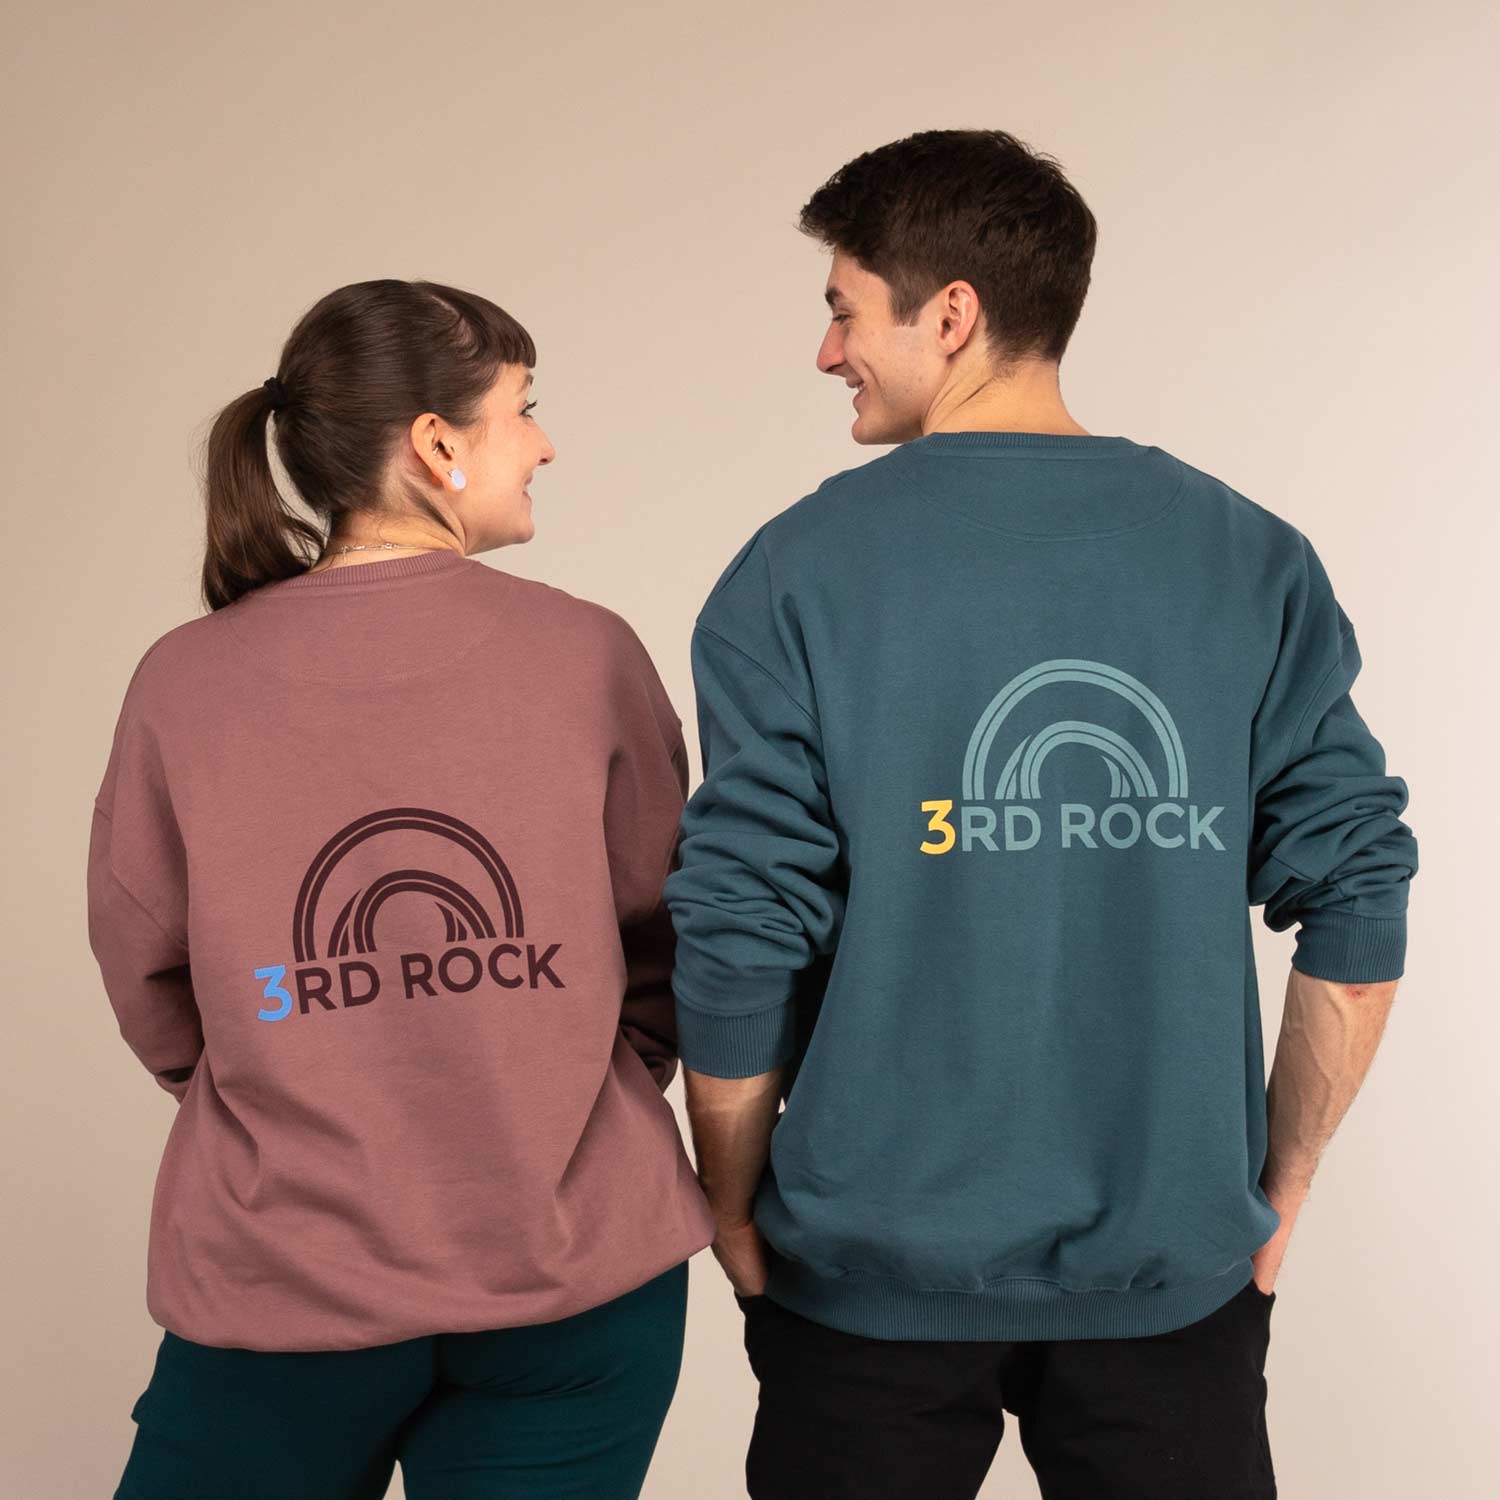 CHARLIE SWEATSHIRT | Oversized Organic Sweatshirt | 3RD ROCK Clothing -  Laura is 5ft 6 with a 36" bust and wears a size M.  Billy is 5ft 11 with a 41" chest and wears a size L